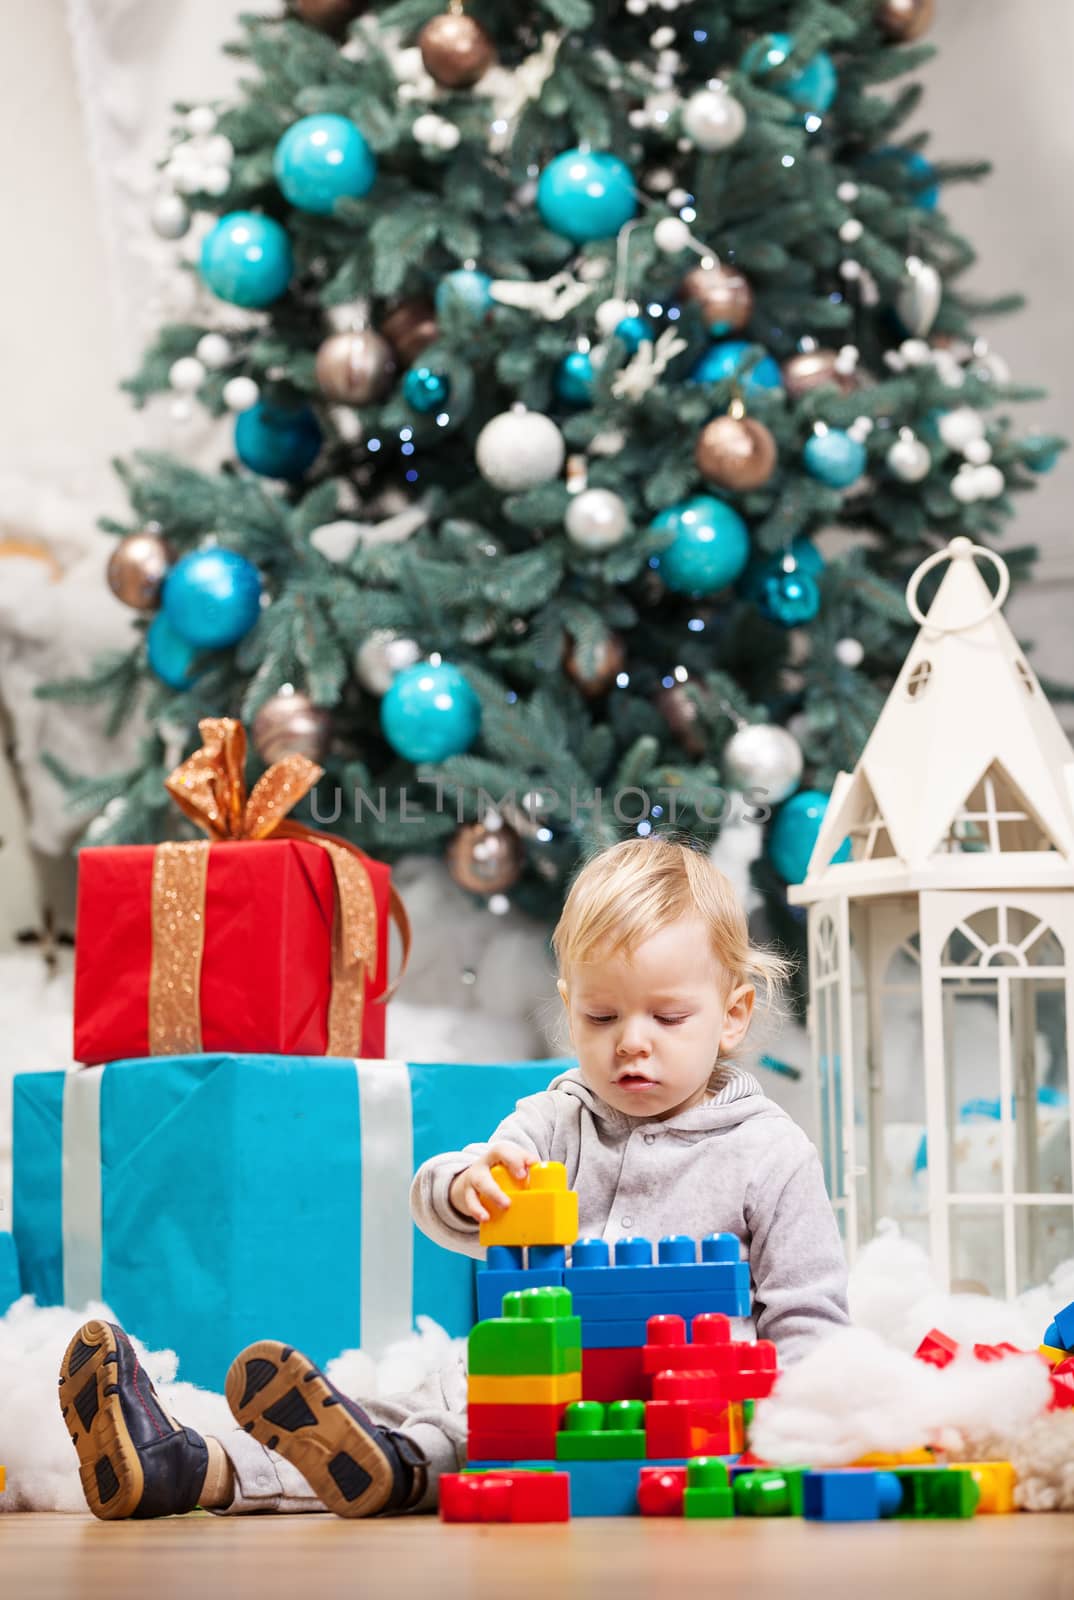 Toddler boy playing with blocks at Christmas tree by photobac